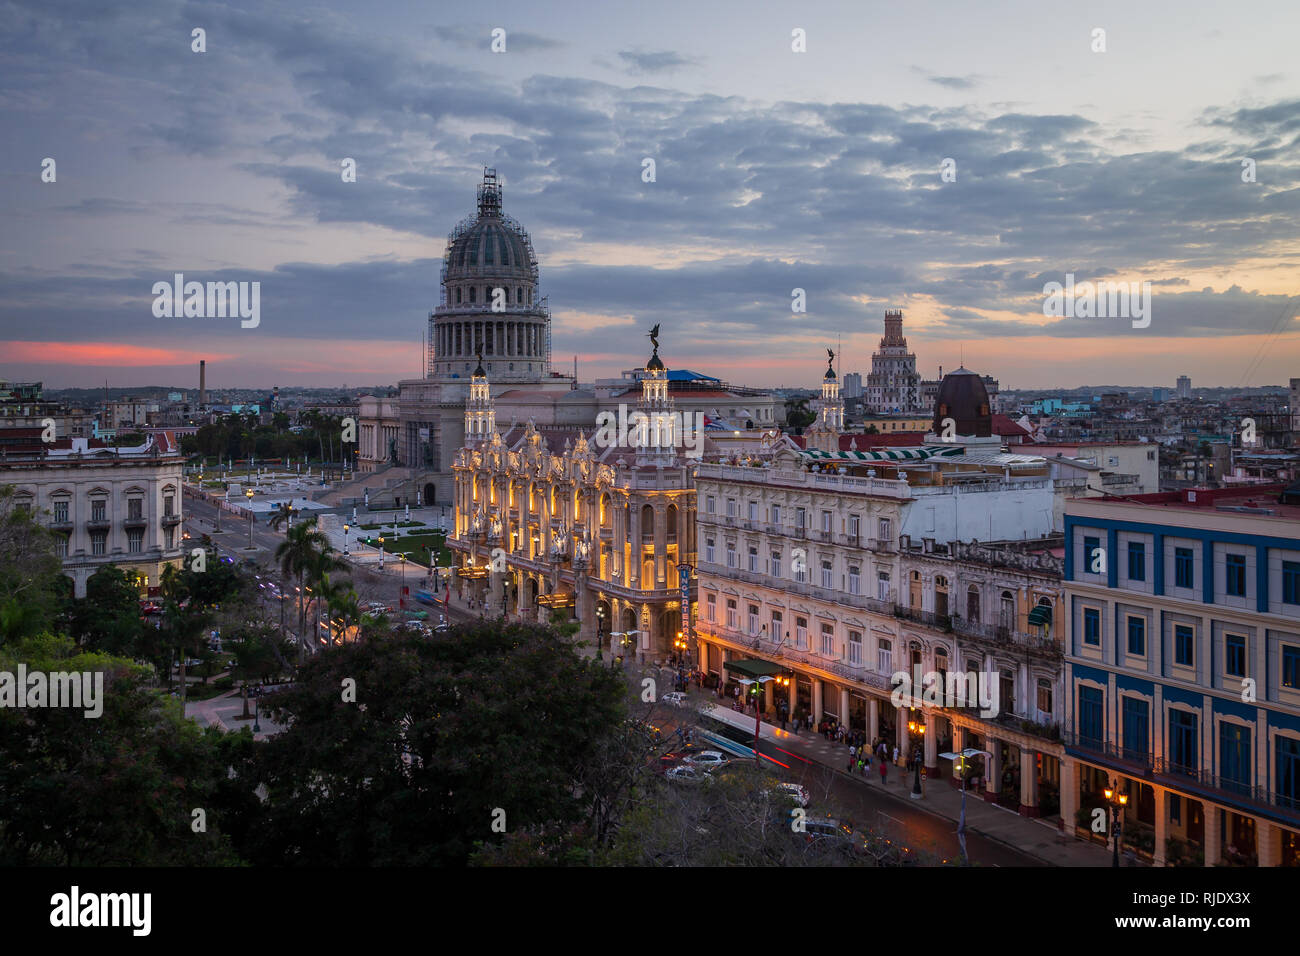 View from the roof of Hotel Parque Central at the Paseo de Marti street and at the El Capitolio, National Capitol Building in Havana, Cuba at sunset Stock Photo